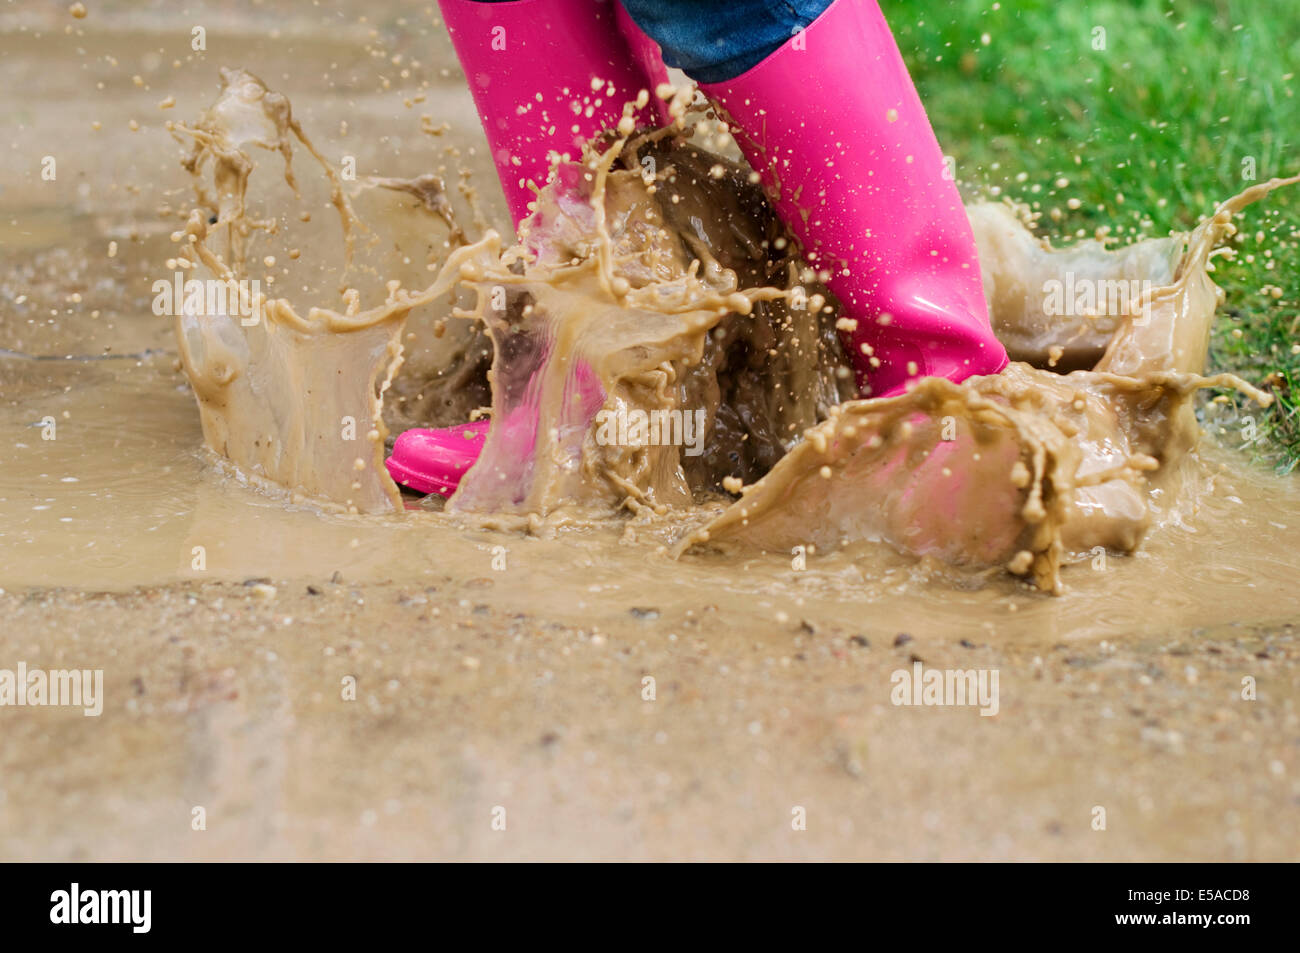 Young woman with rubber boots jumping in puddle, Debica, Poland. Stock Photo